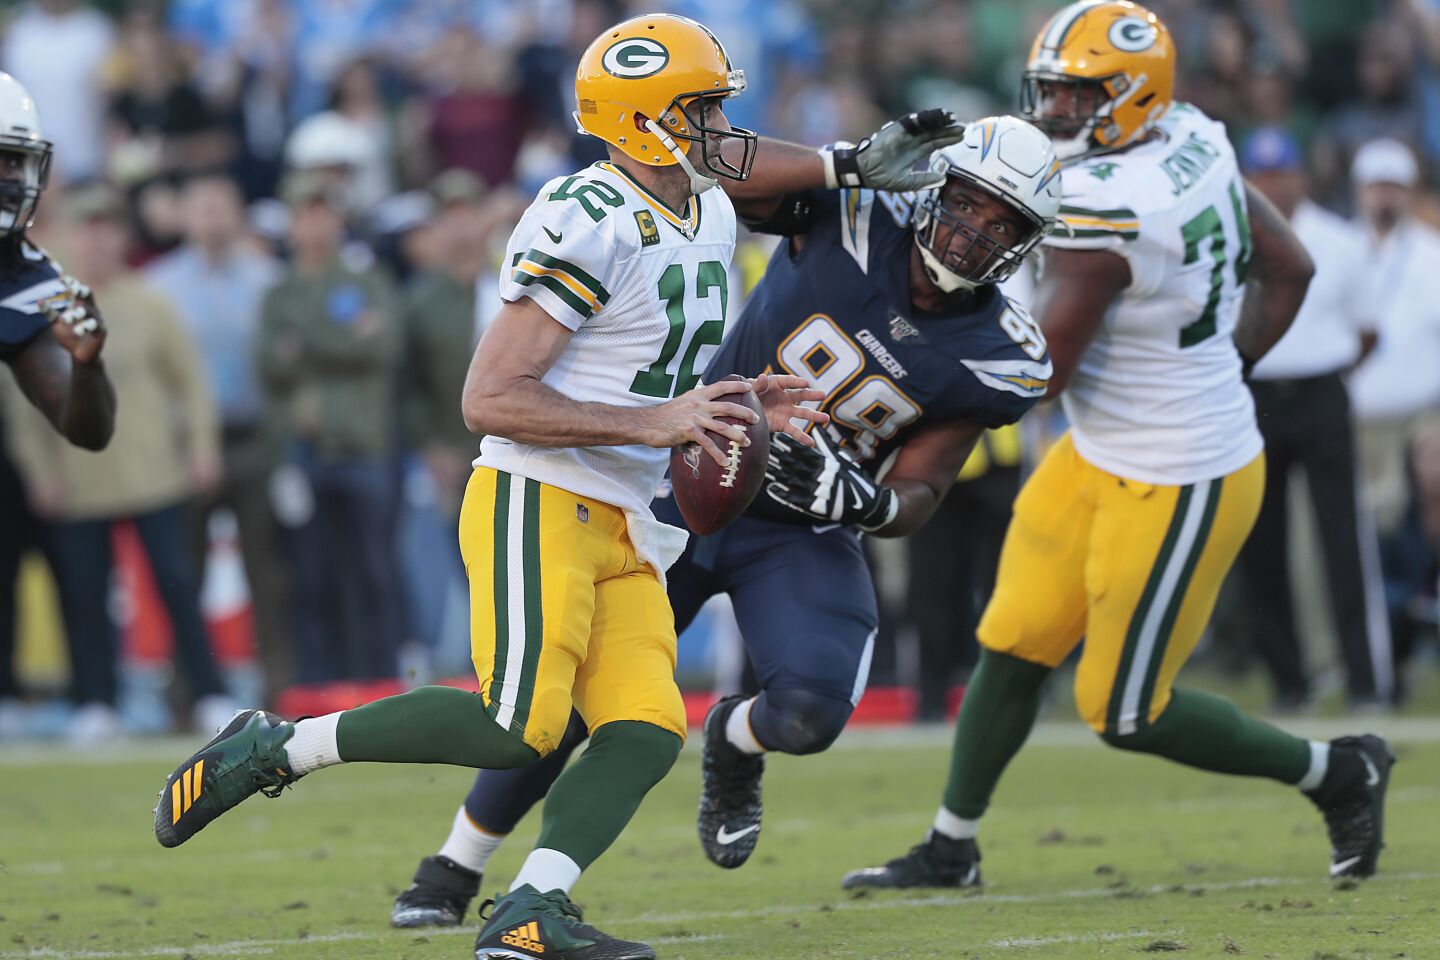 Packers quarterback Aaron Rodgers scrambles past Chargers defensive tackle Jerry Tillery.